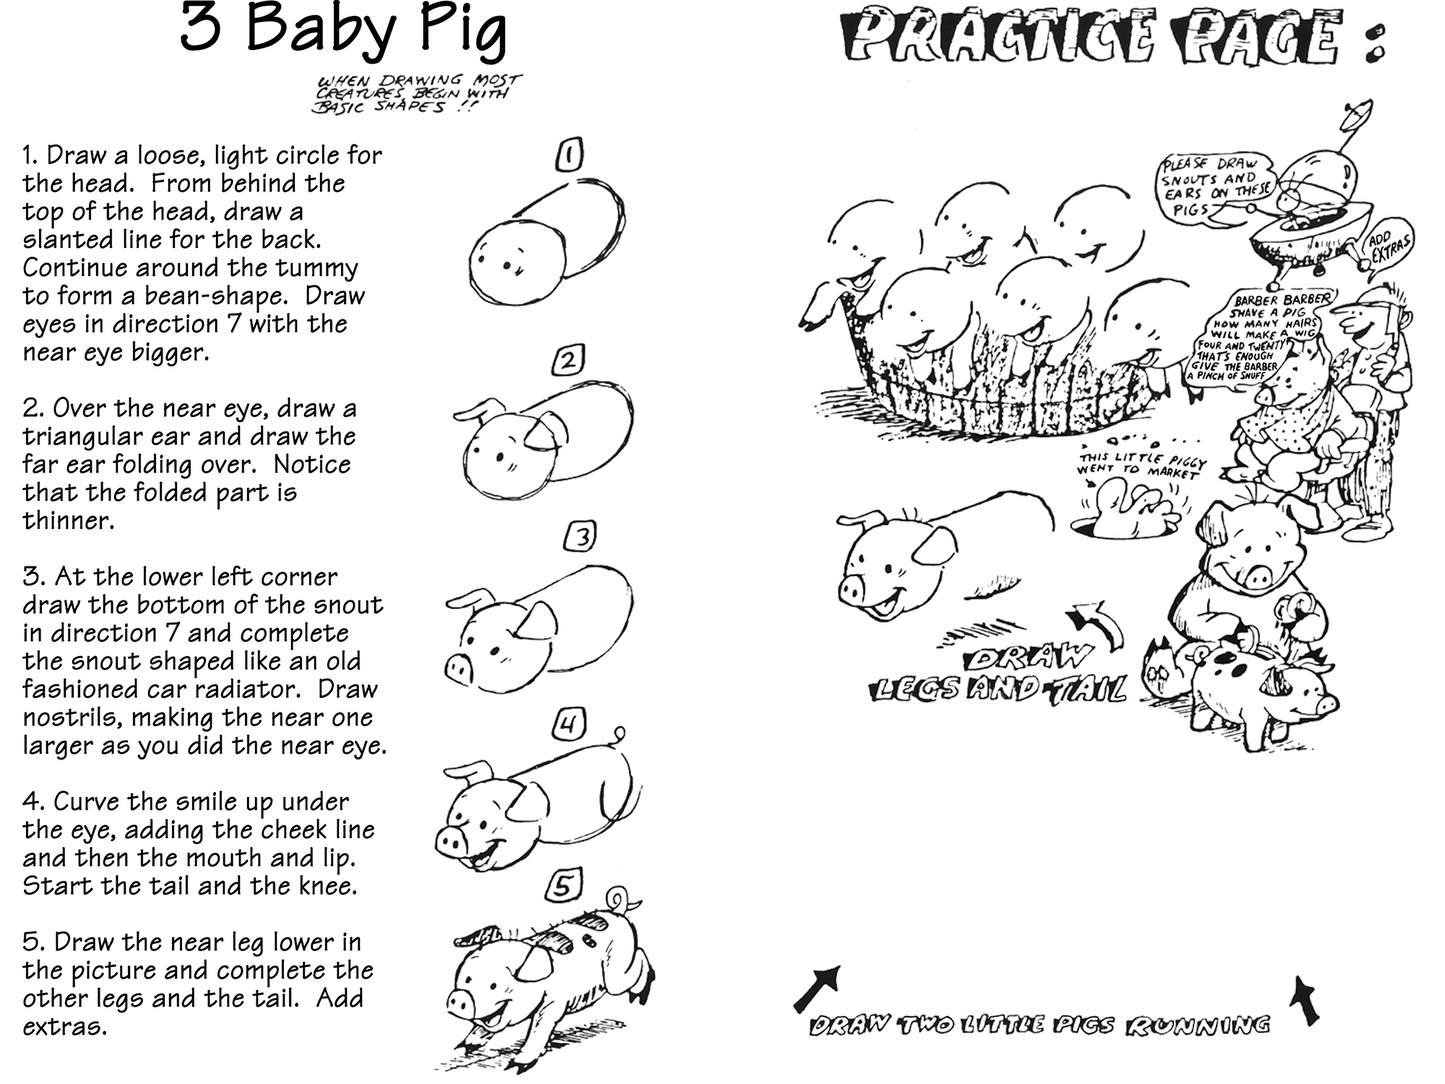 Baby Pig full spread from the book Cute Animals by Bruce McIntyre